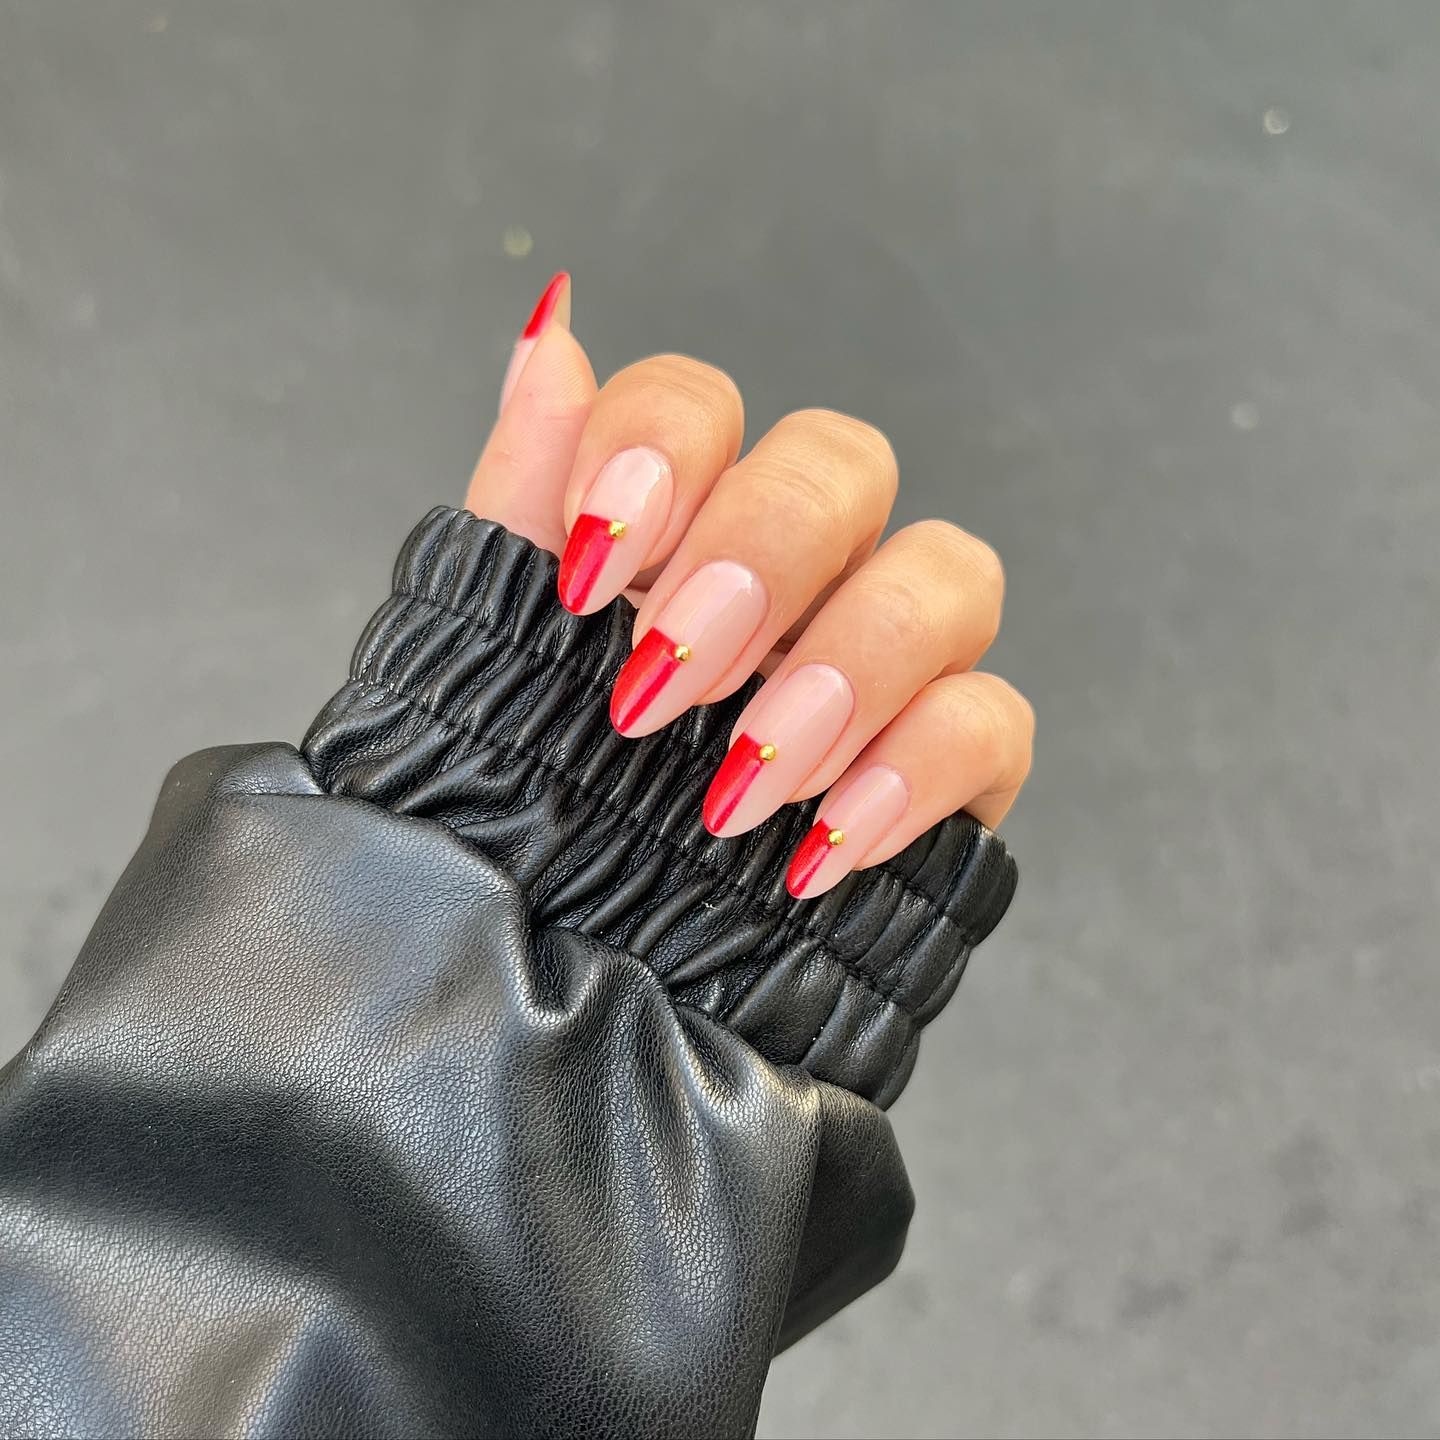 9 Best Black Nail Art Ideas for Fall 2019 - theFashionSpot